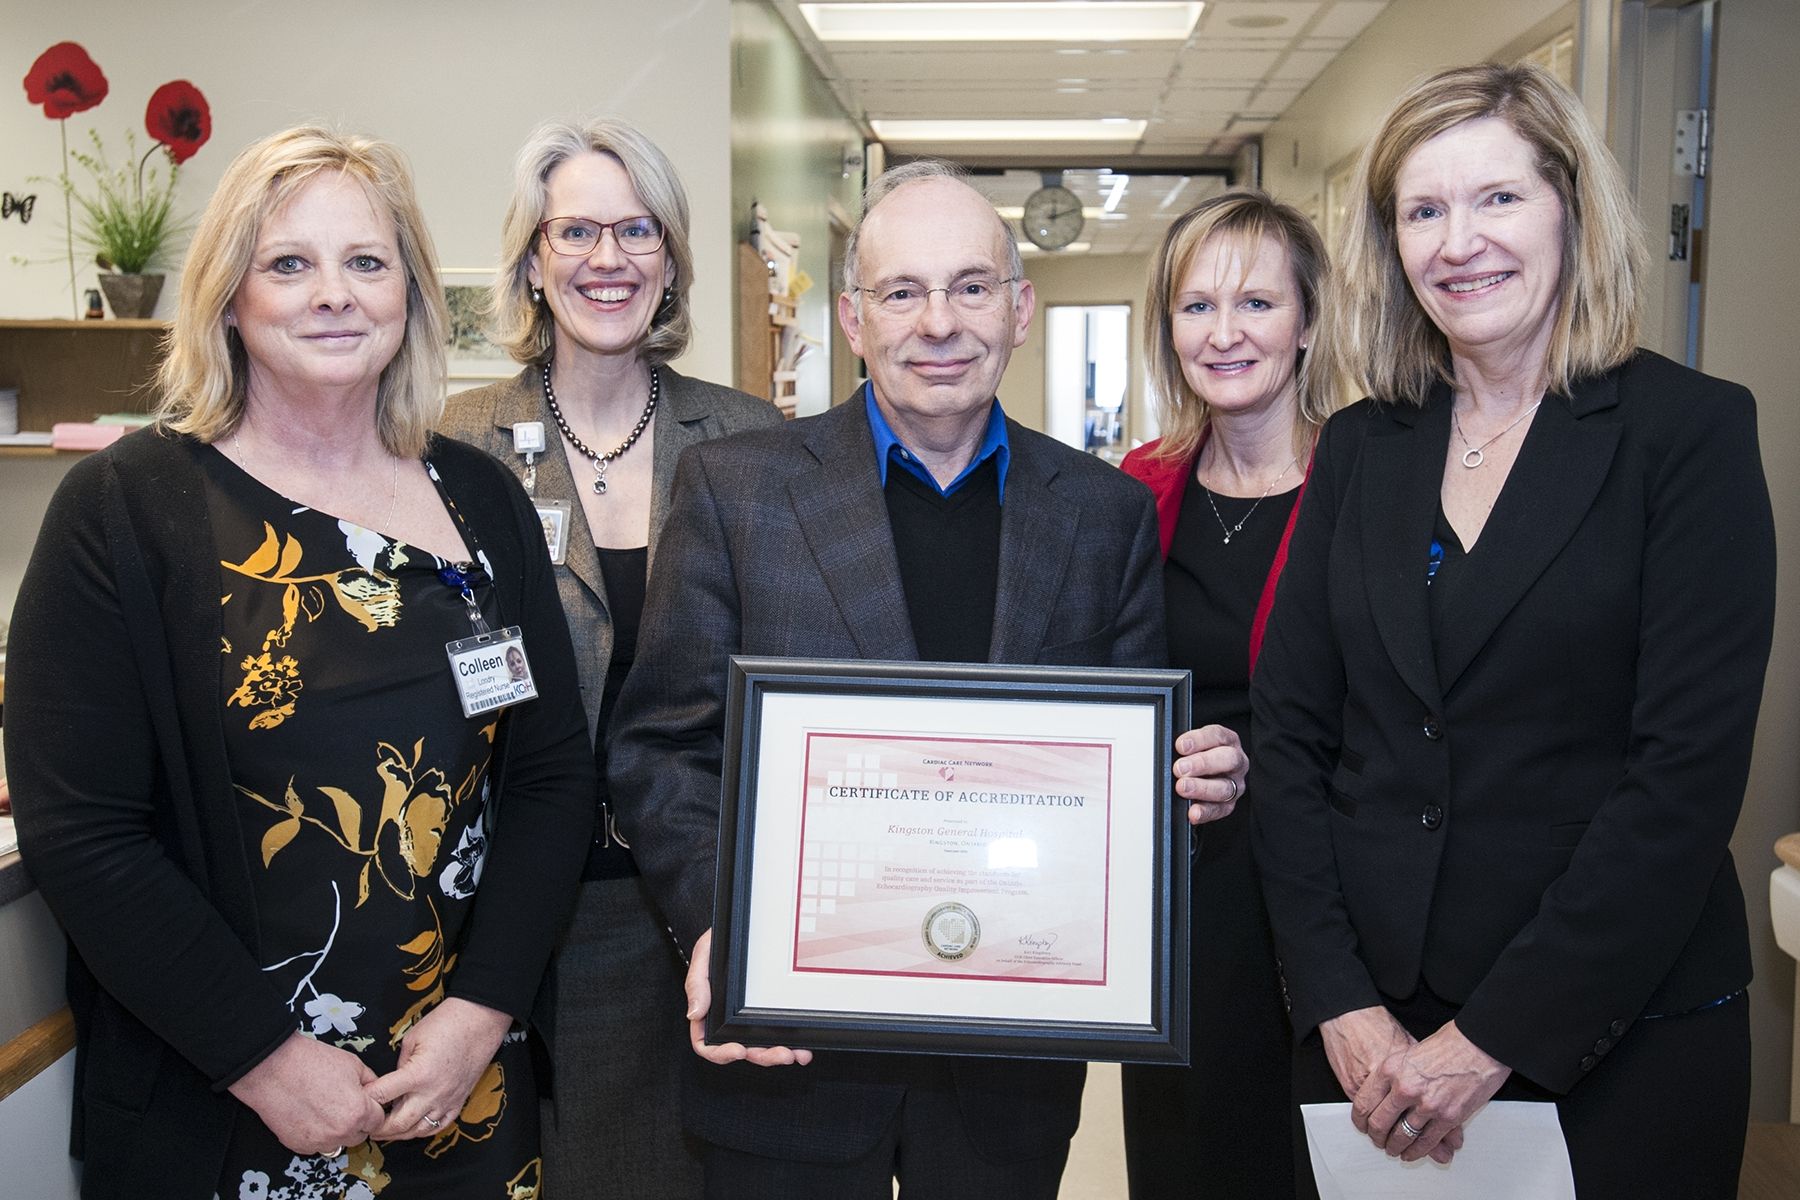 Assistant Deputy Minister Susan Fitzpatrick (right) from the Ministry of Health and Long-Term Care presented the Certificate of Accreditation to KGH. (From left) Colleen Londry, Chief  Sonographer, CEO Leslee Thompson, Dr. Anthony Sanfilippo and Julie Caffin, Program Operational Director, Cardiac and Emergency.